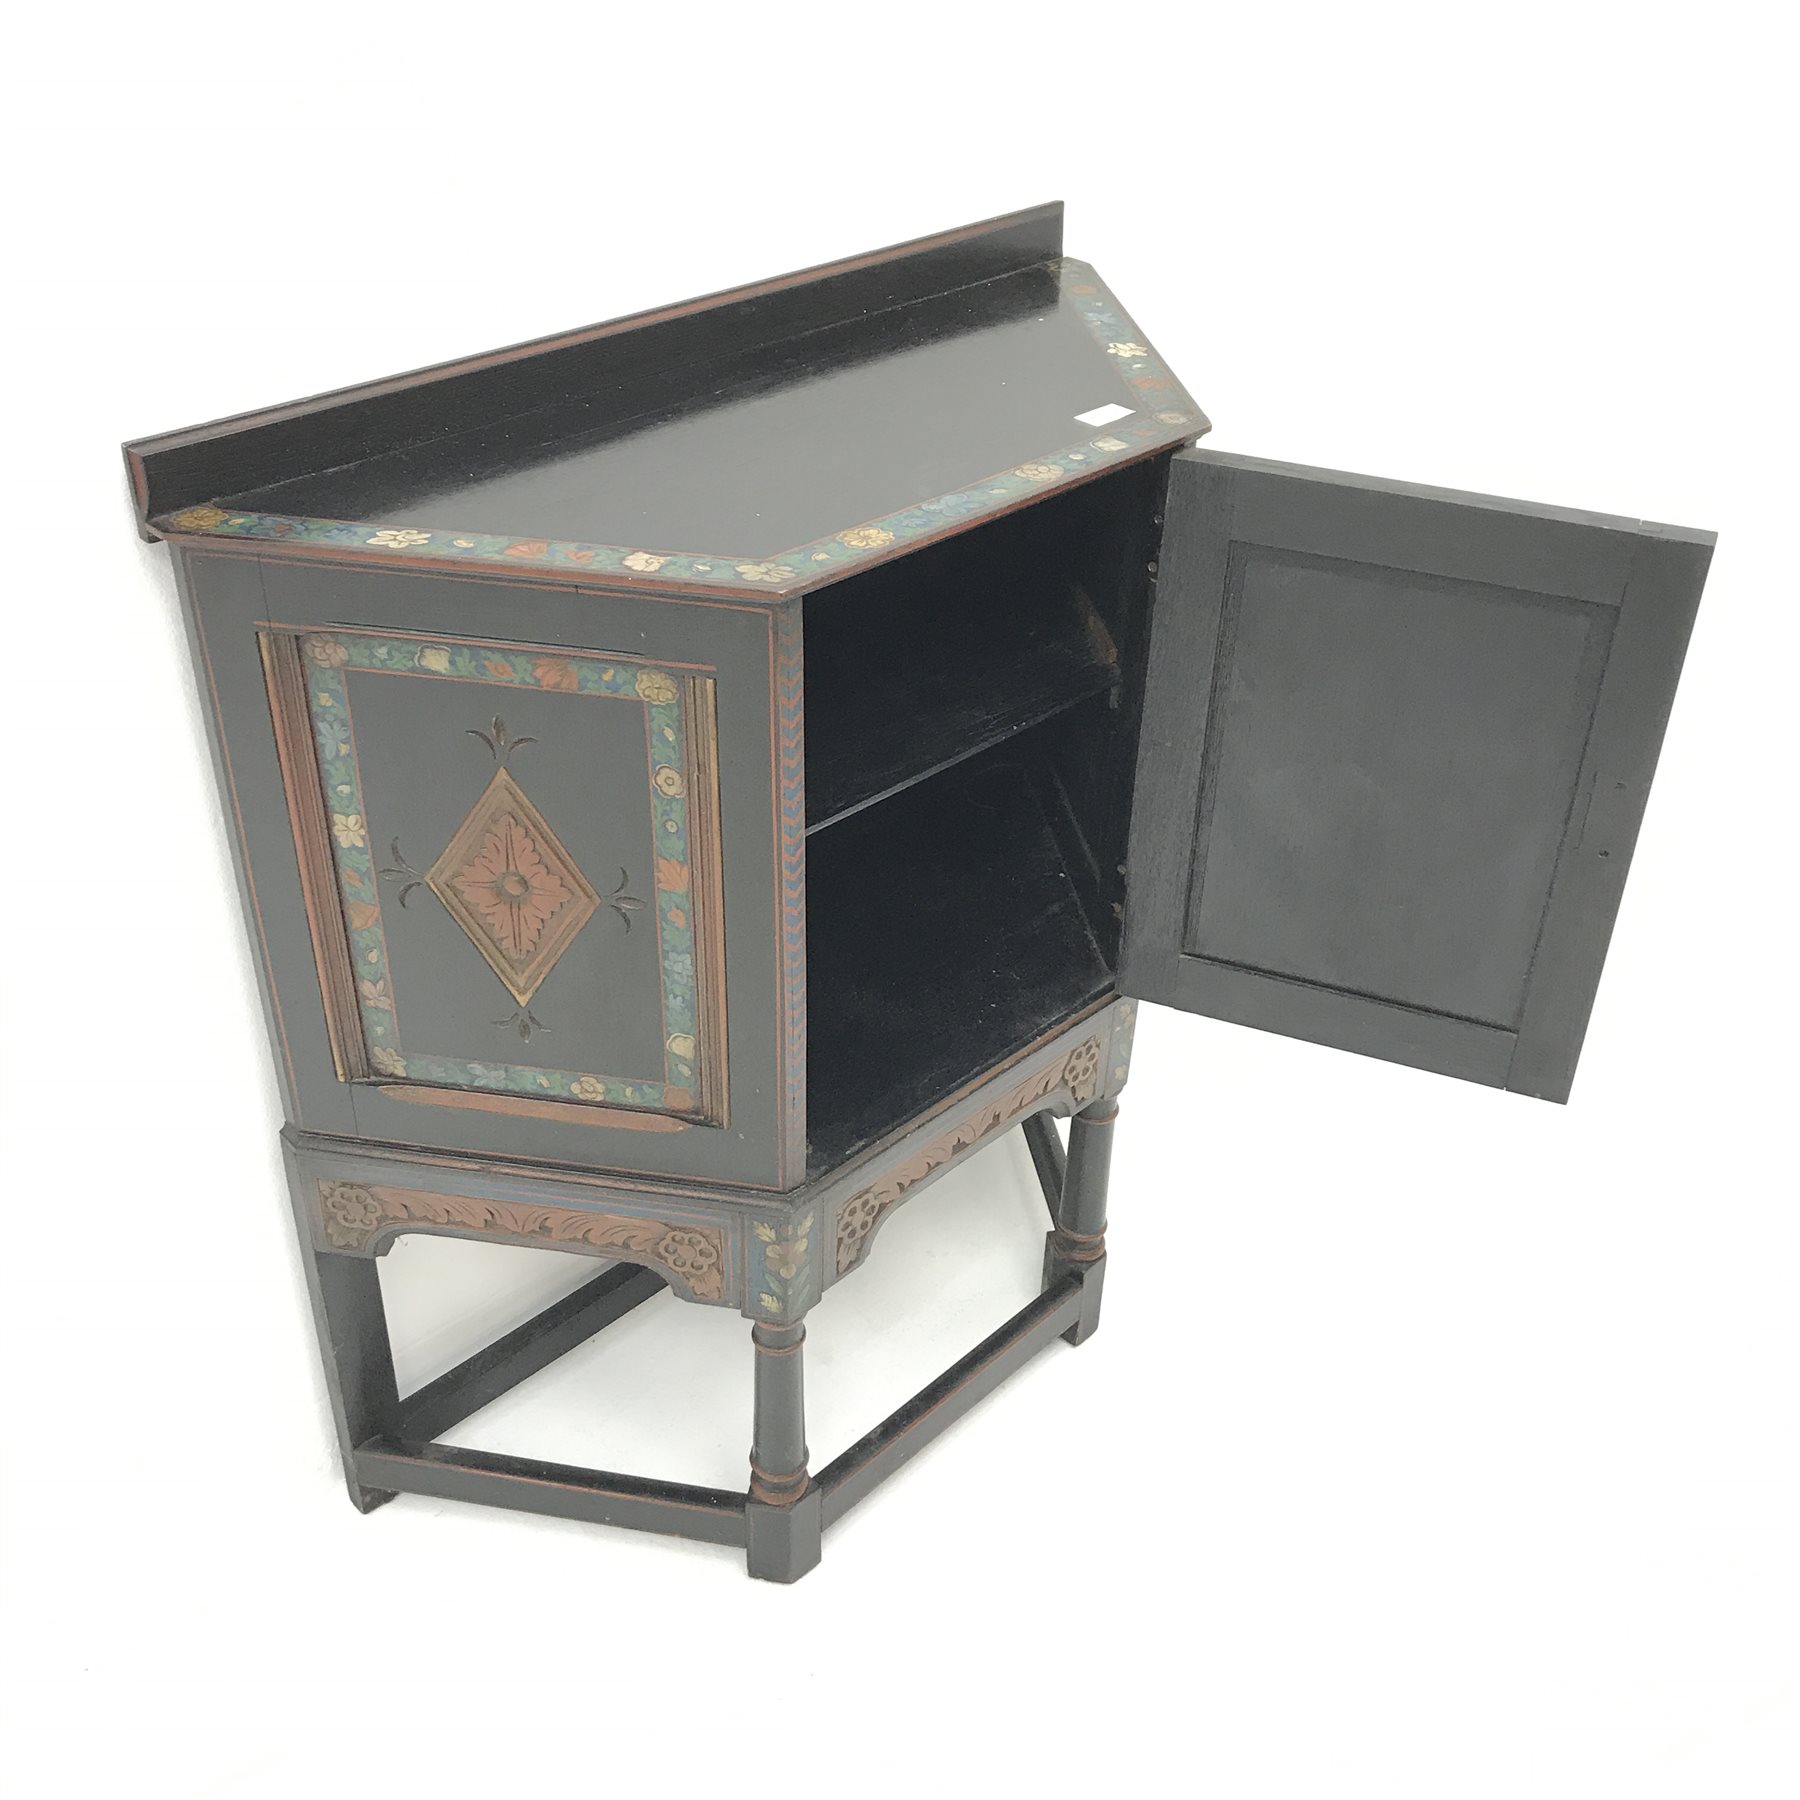 Early 20th century credence cupboard, painted black finish, carved panels, turned supports joined by - Image 2 of 3